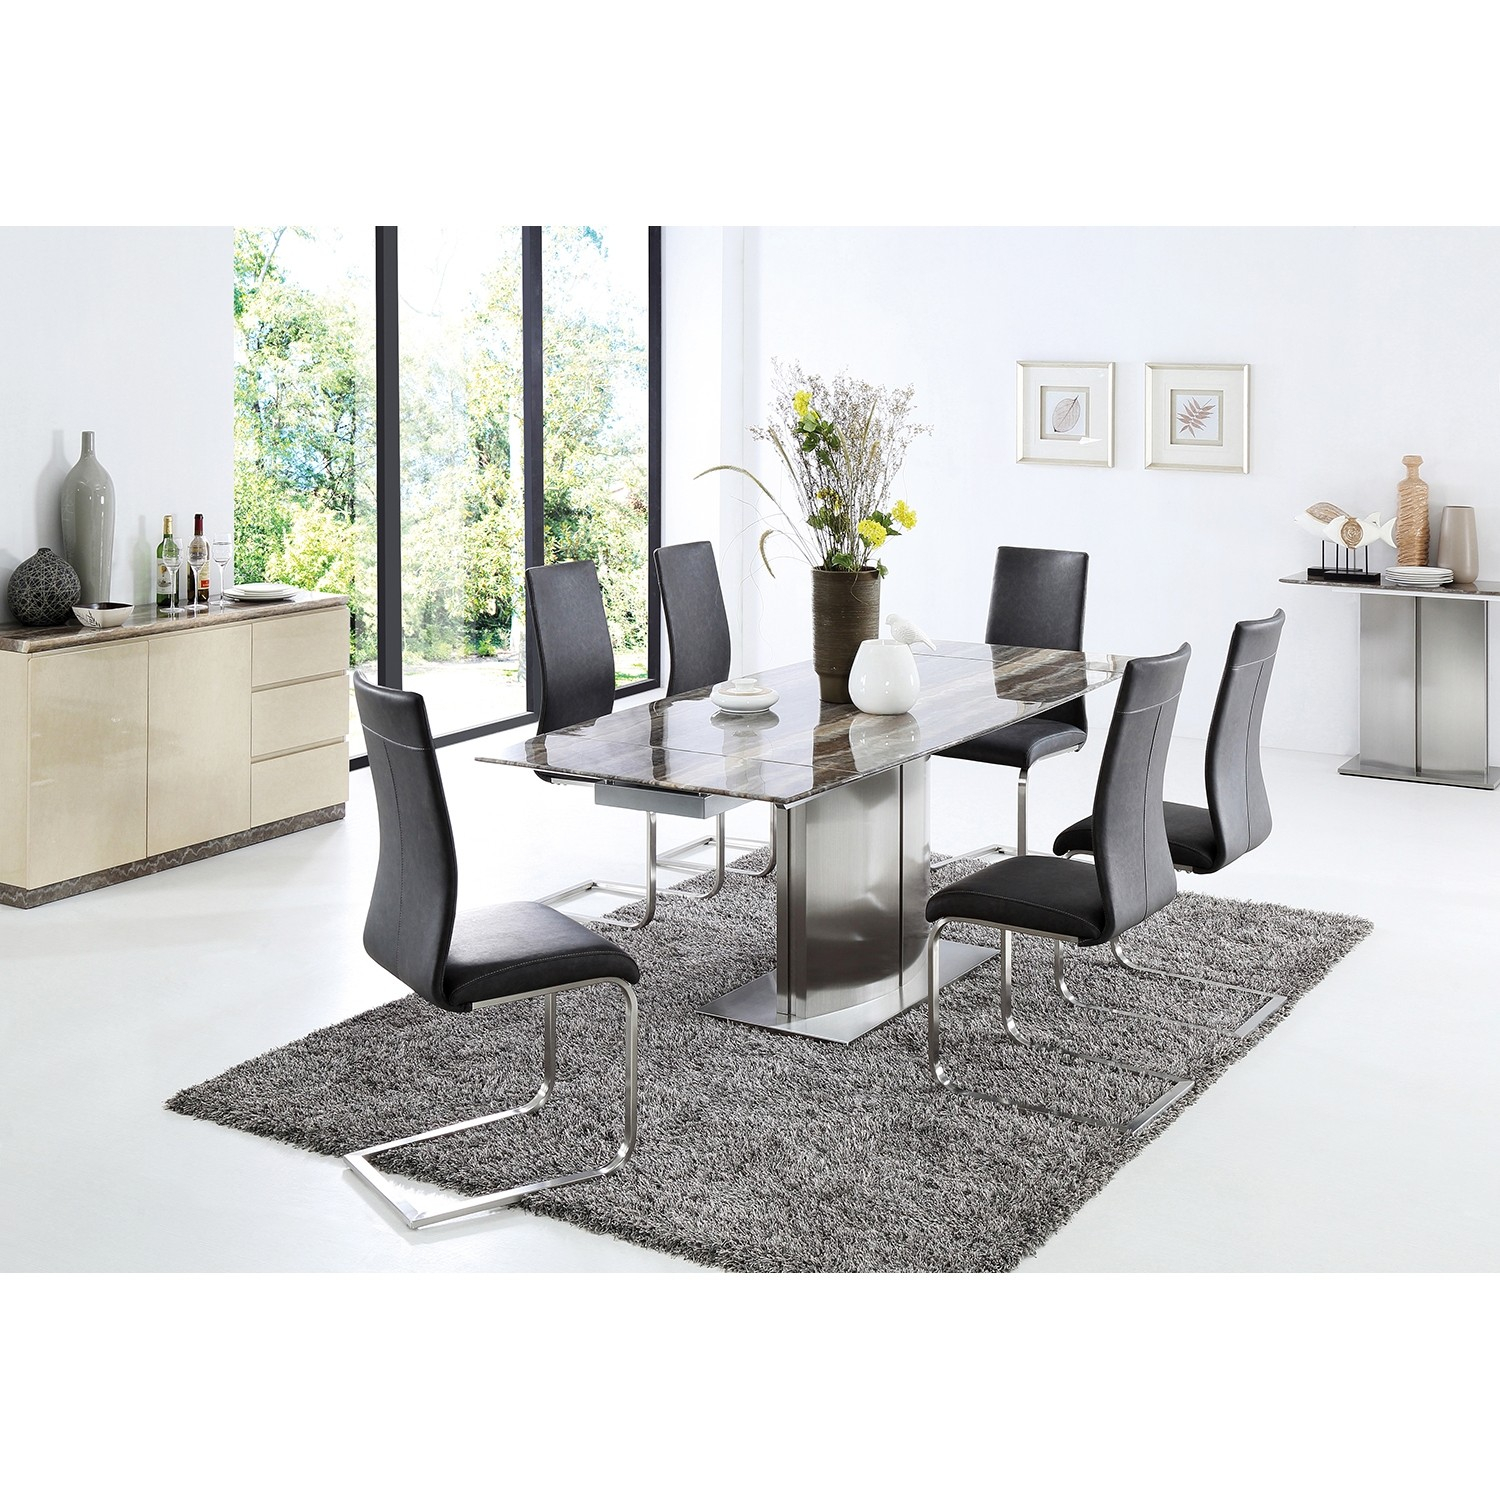 Casa Wave Dining Table 6 Chairs Dining Set inside sizing 1500 X 1500